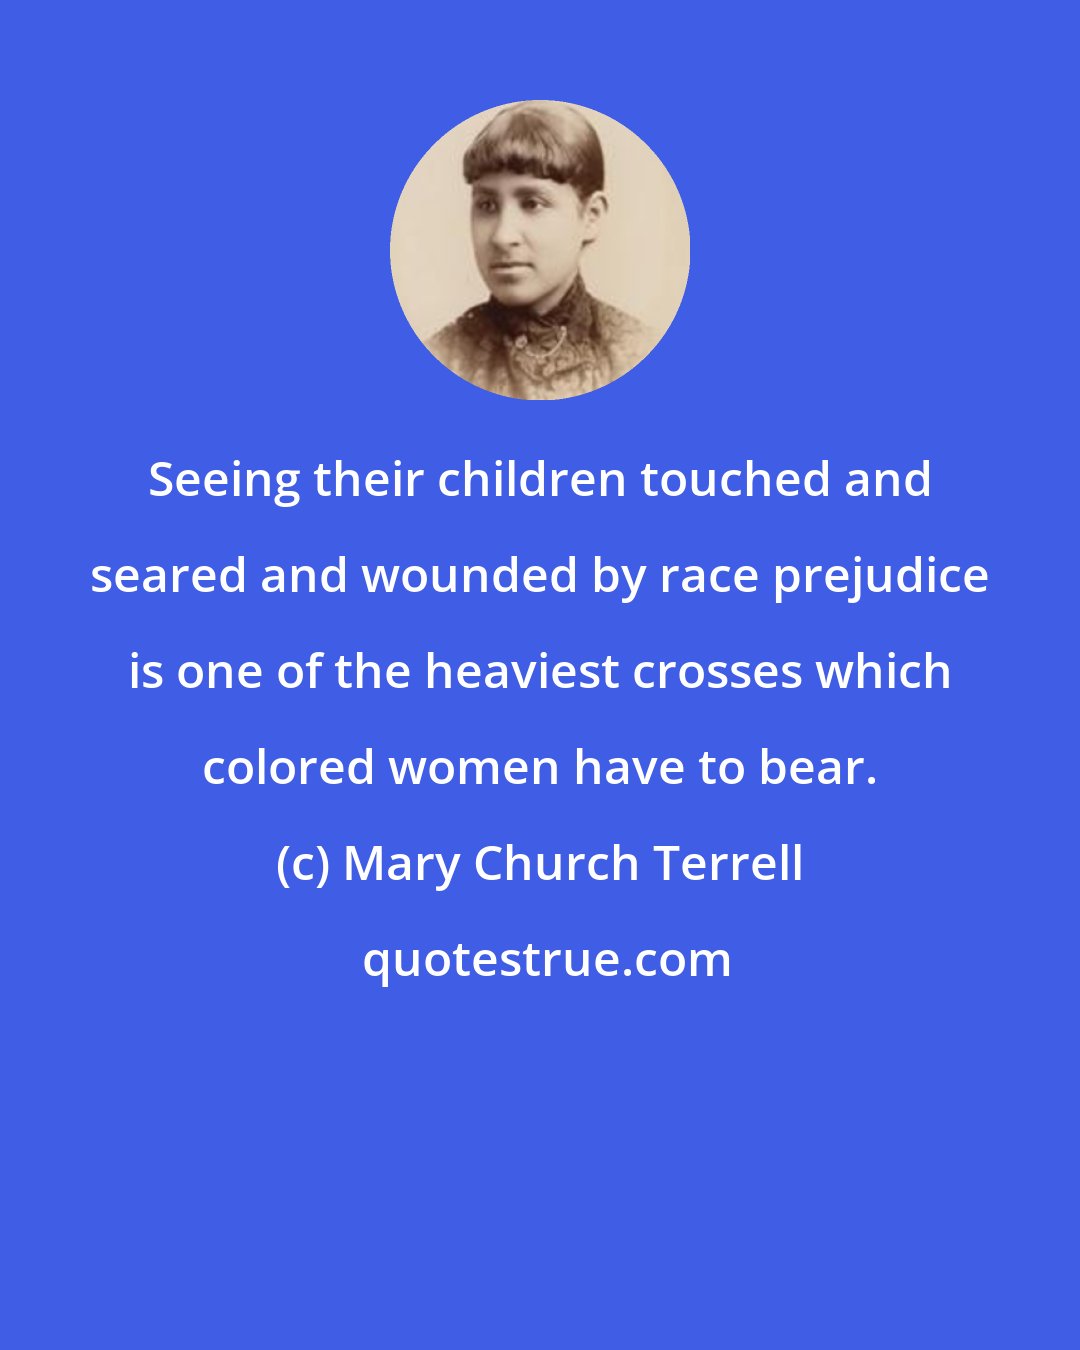 Mary Church Terrell: Seeing their children touched and seared and wounded by race prejudice is one of the heaviest crosses which colored women have to bear.